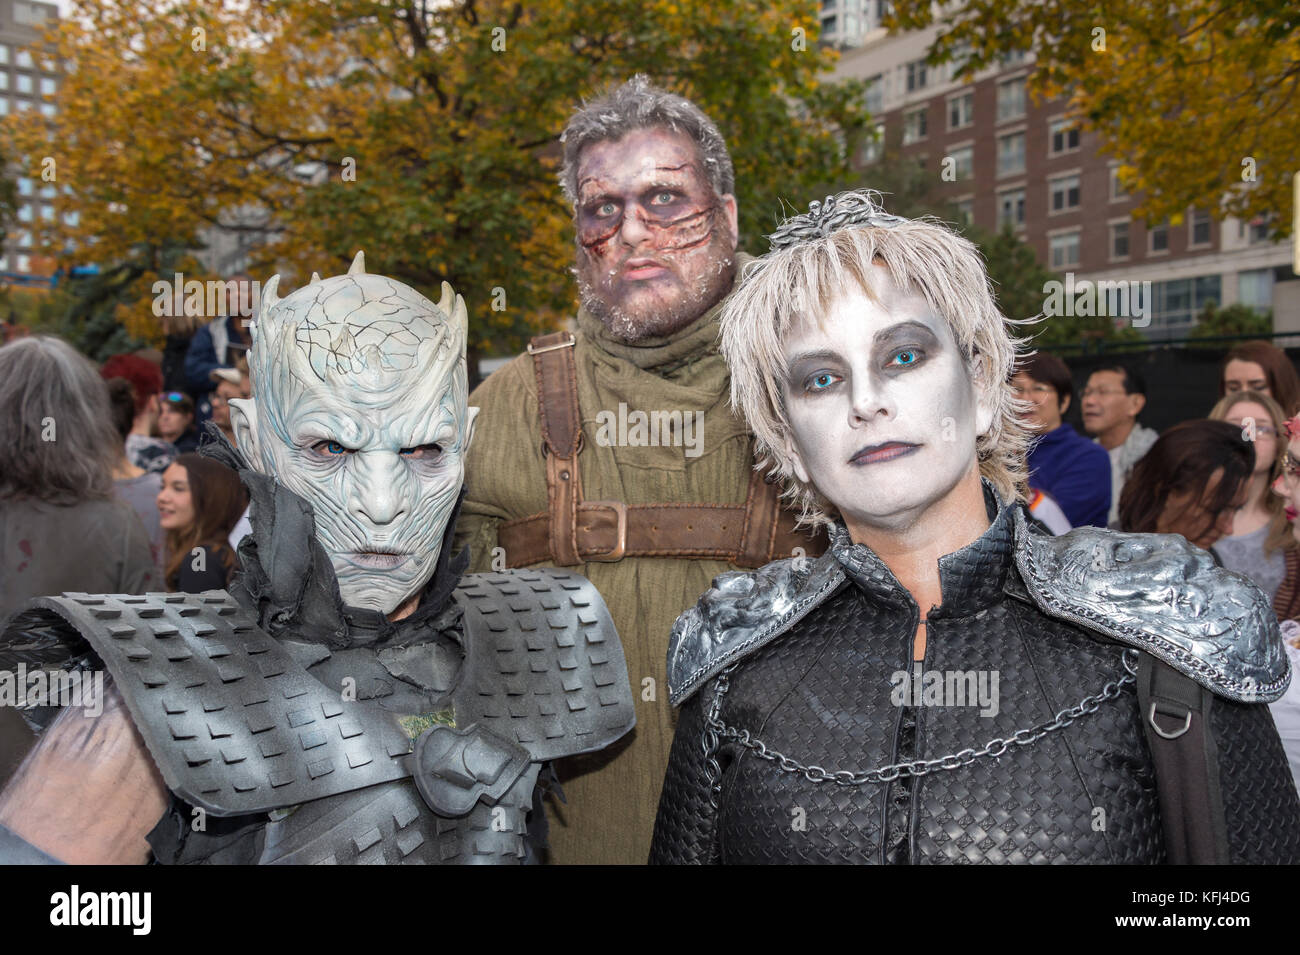 Montreal, Canada - October 28, 2017: Game of Thrones White Walkers and Hodor taking part in the Zombie Walk in Montreal Downtown Stock Photo